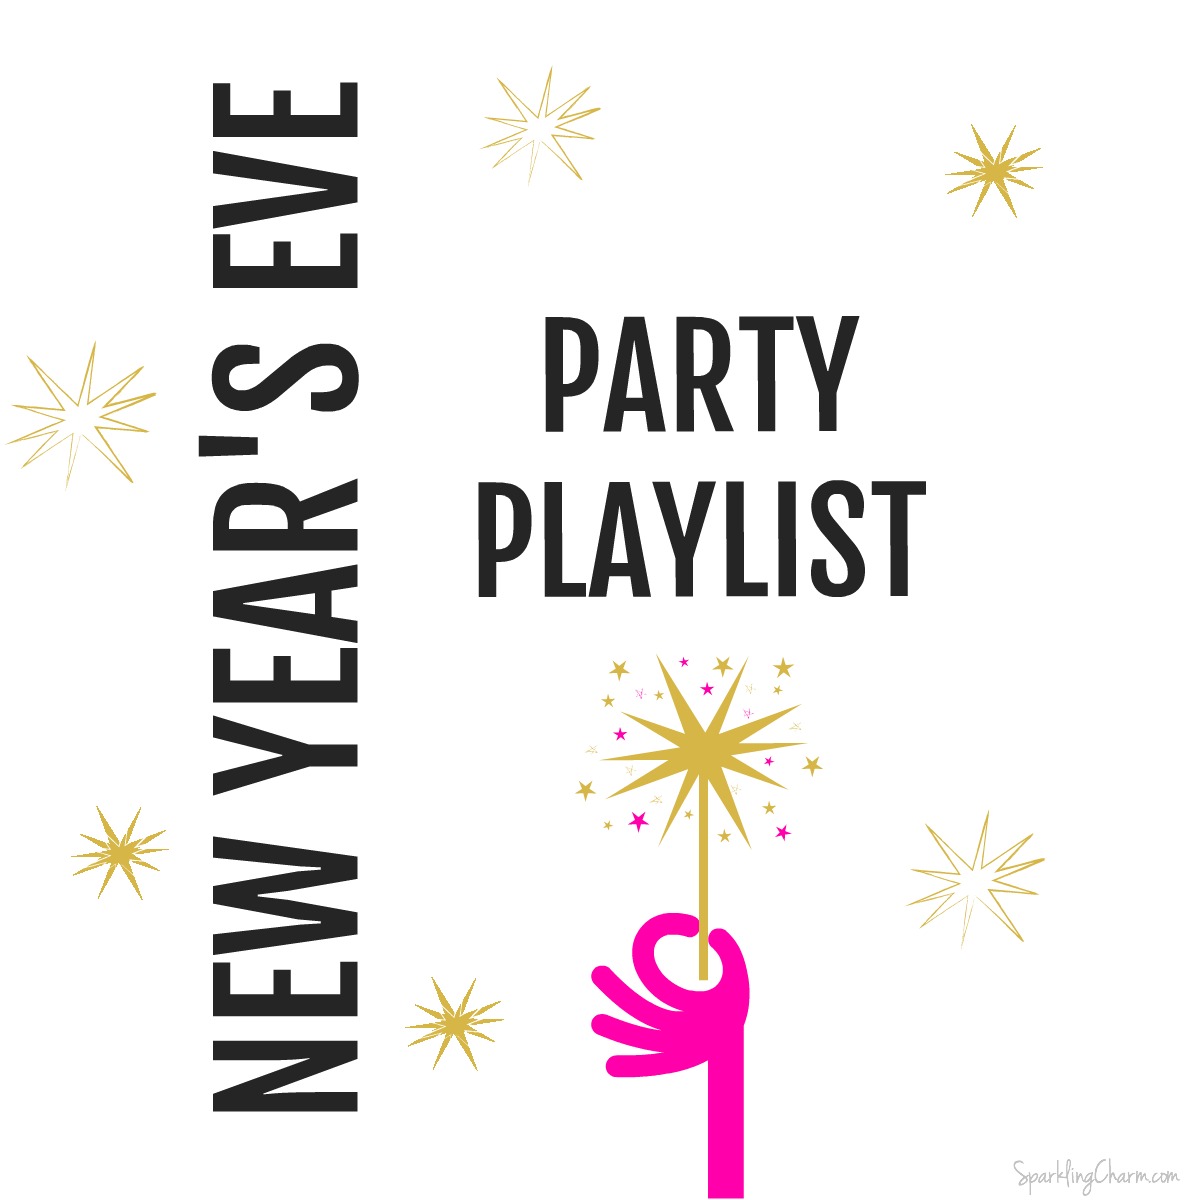 New Year’s Eve Party Playlist